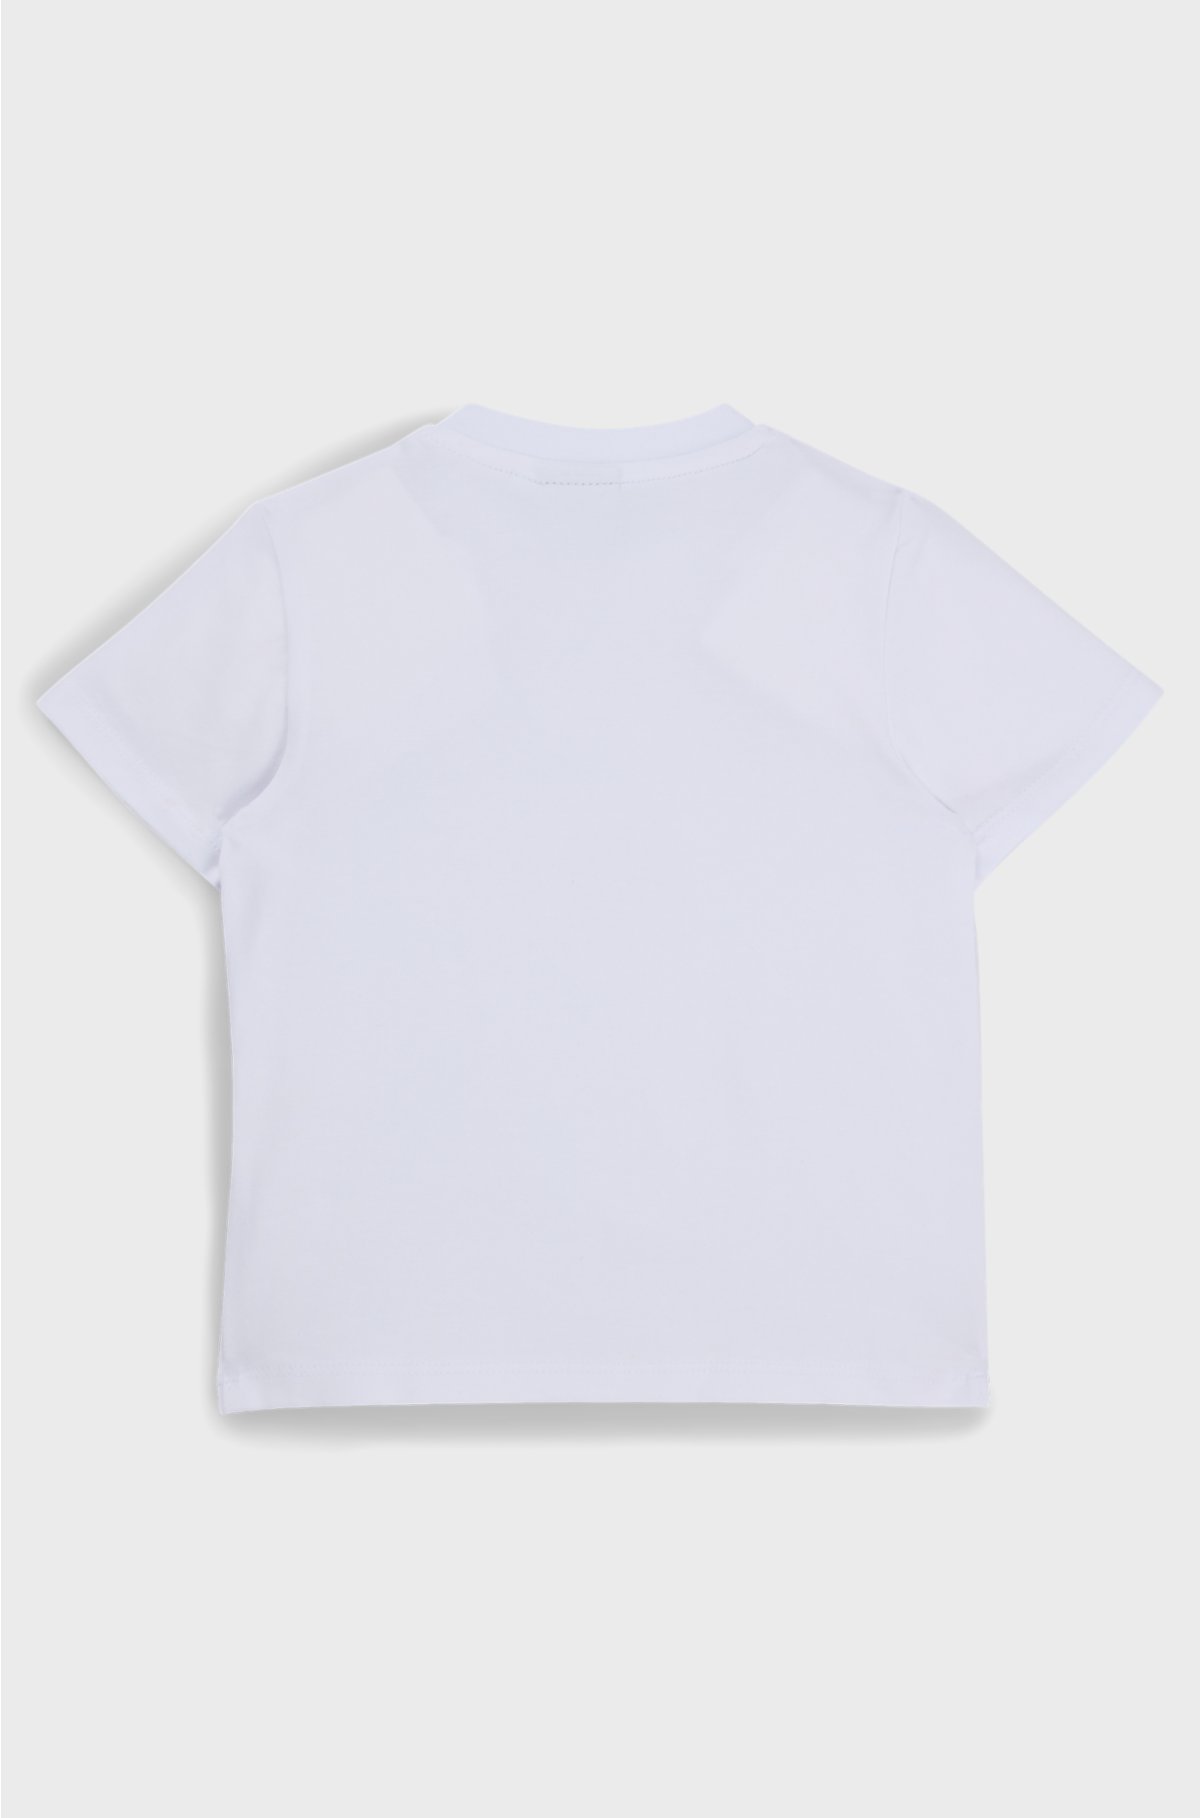 Kids' T-shirt in cotton jersey with embossed logo print, White